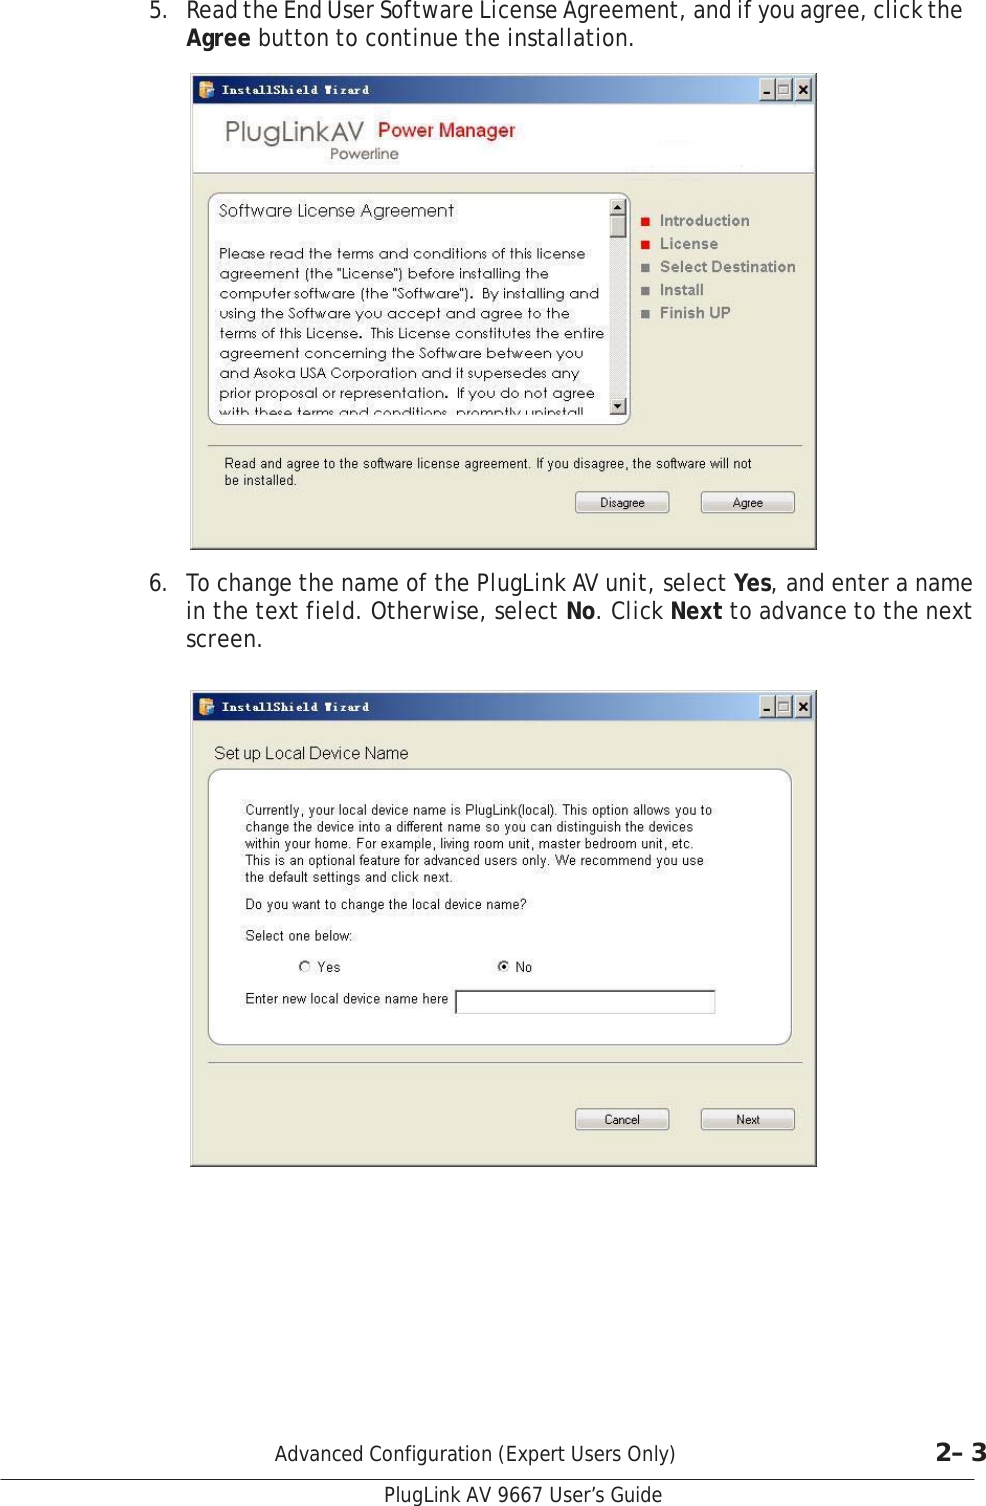   5.  Read the End User Software License Agreement, and if you agree, click the Agree button to continue the installation.    6.  To change the name of the PlugLink AV unit, select Yes, and enter a name in the text field. Otherwise, select No. Click Next to advance to the next screen.                 Advanced Configuration (Expert Users Only)  2– 3  PlugLink AV 9667 User’s Guide 